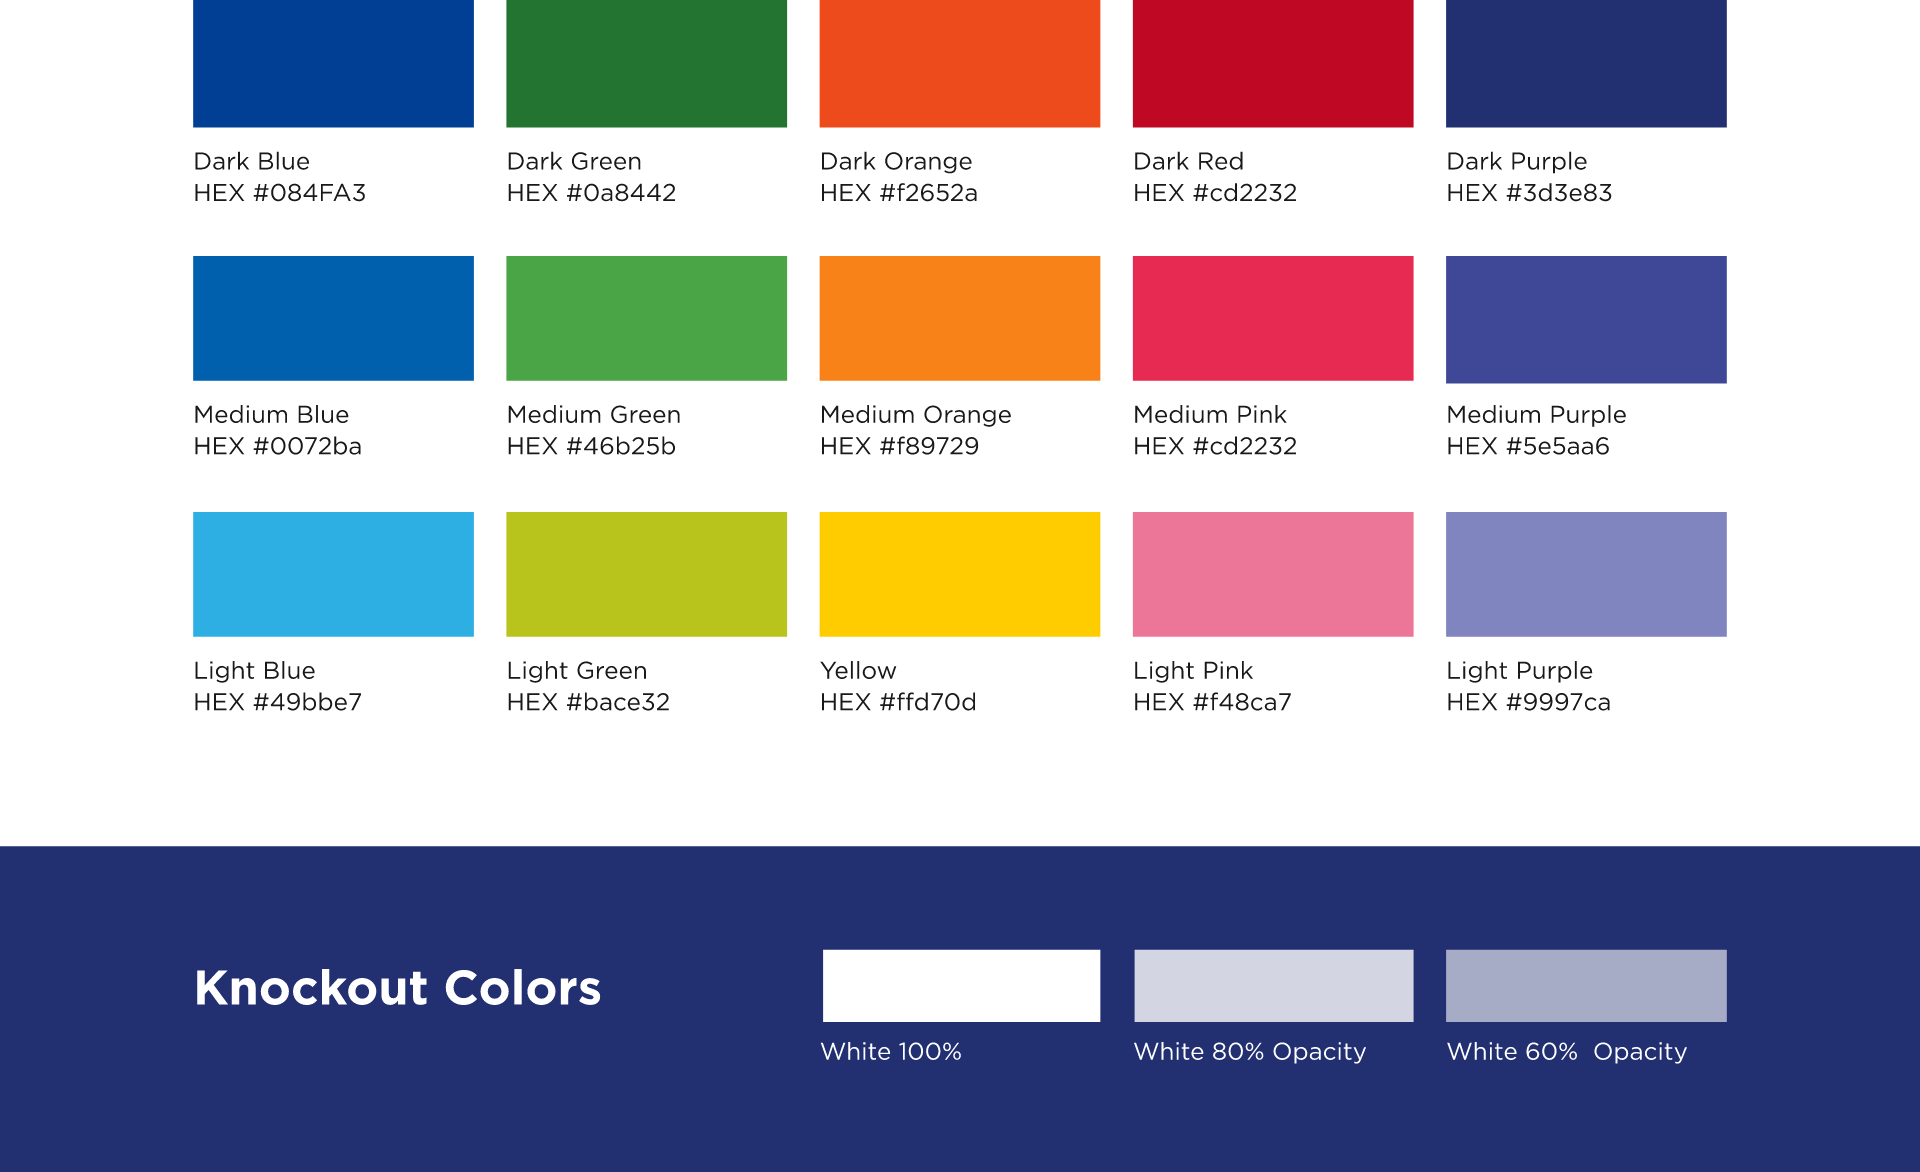 Color palette ideal for the DEU Kids Festival, featuring various shades and hex color codes, including blues, greens, yellows, oranges, reds, and purples, alongside examples of knockout